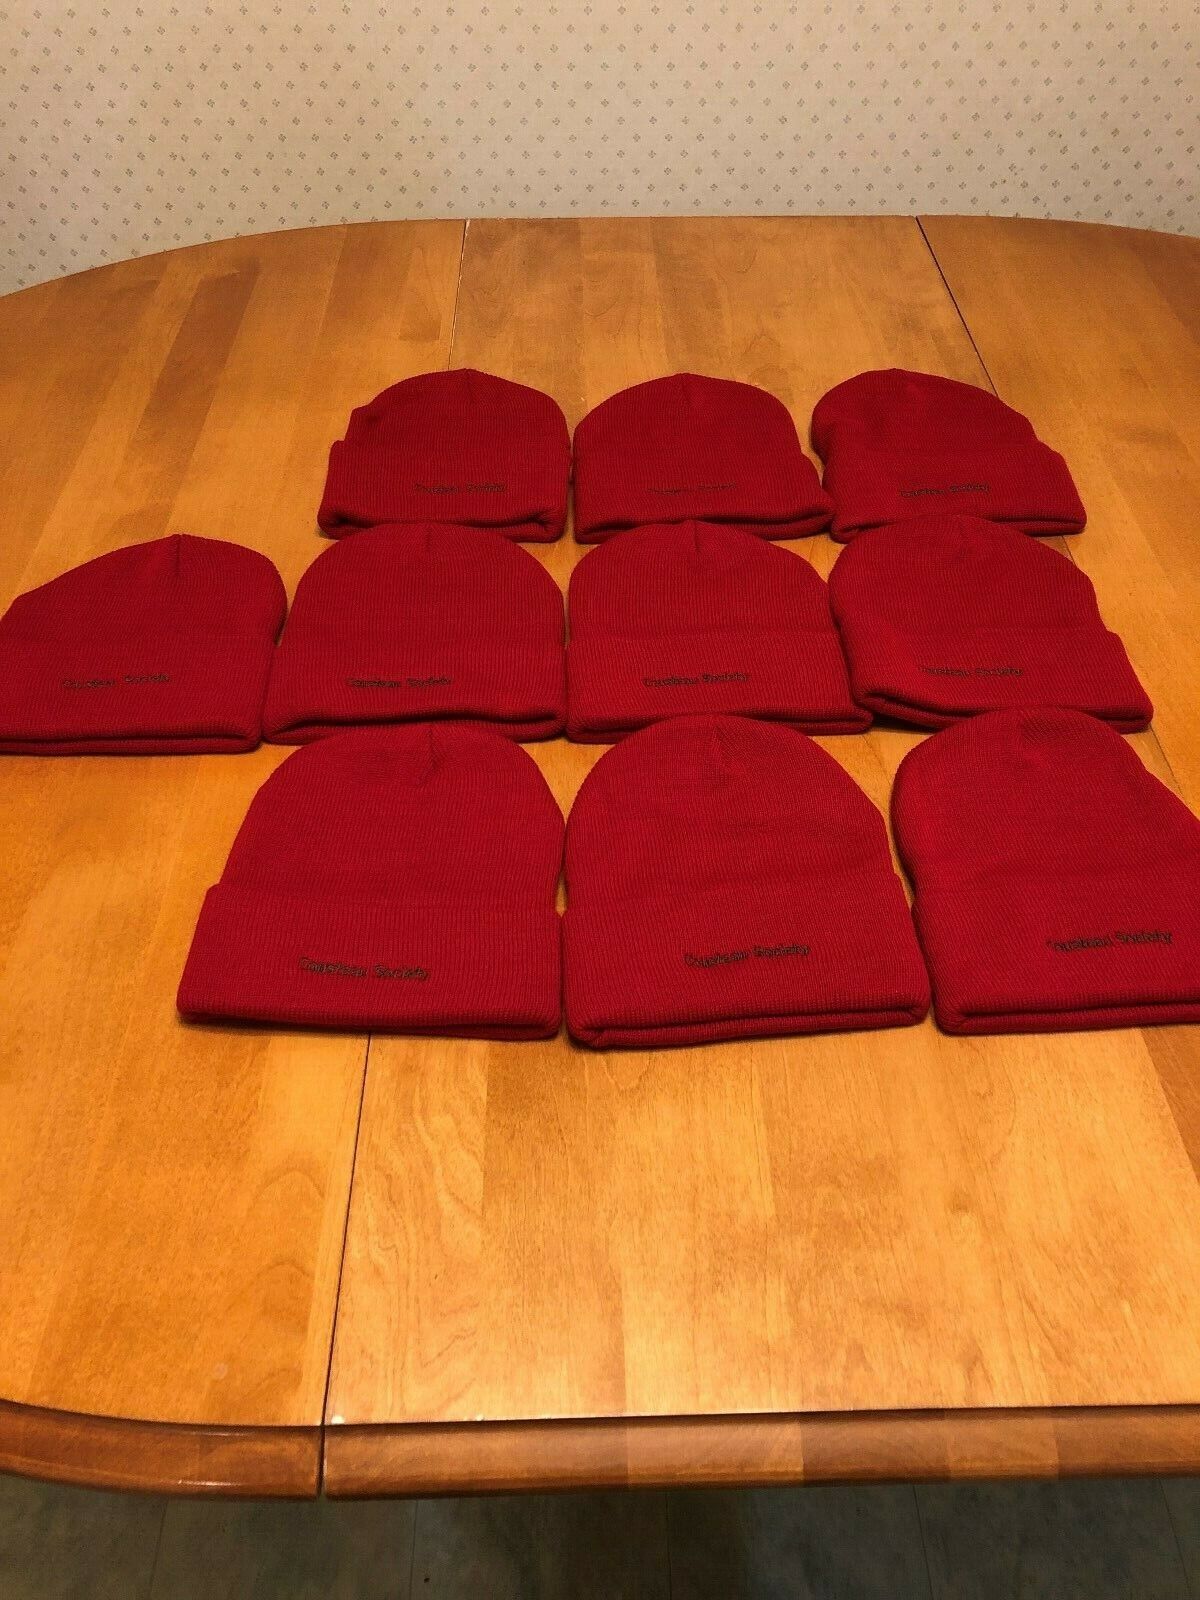 UNISEX SET OF 10 COUSTEAU SOCIETY RED CAPS NEW COLD WEATHER HATS